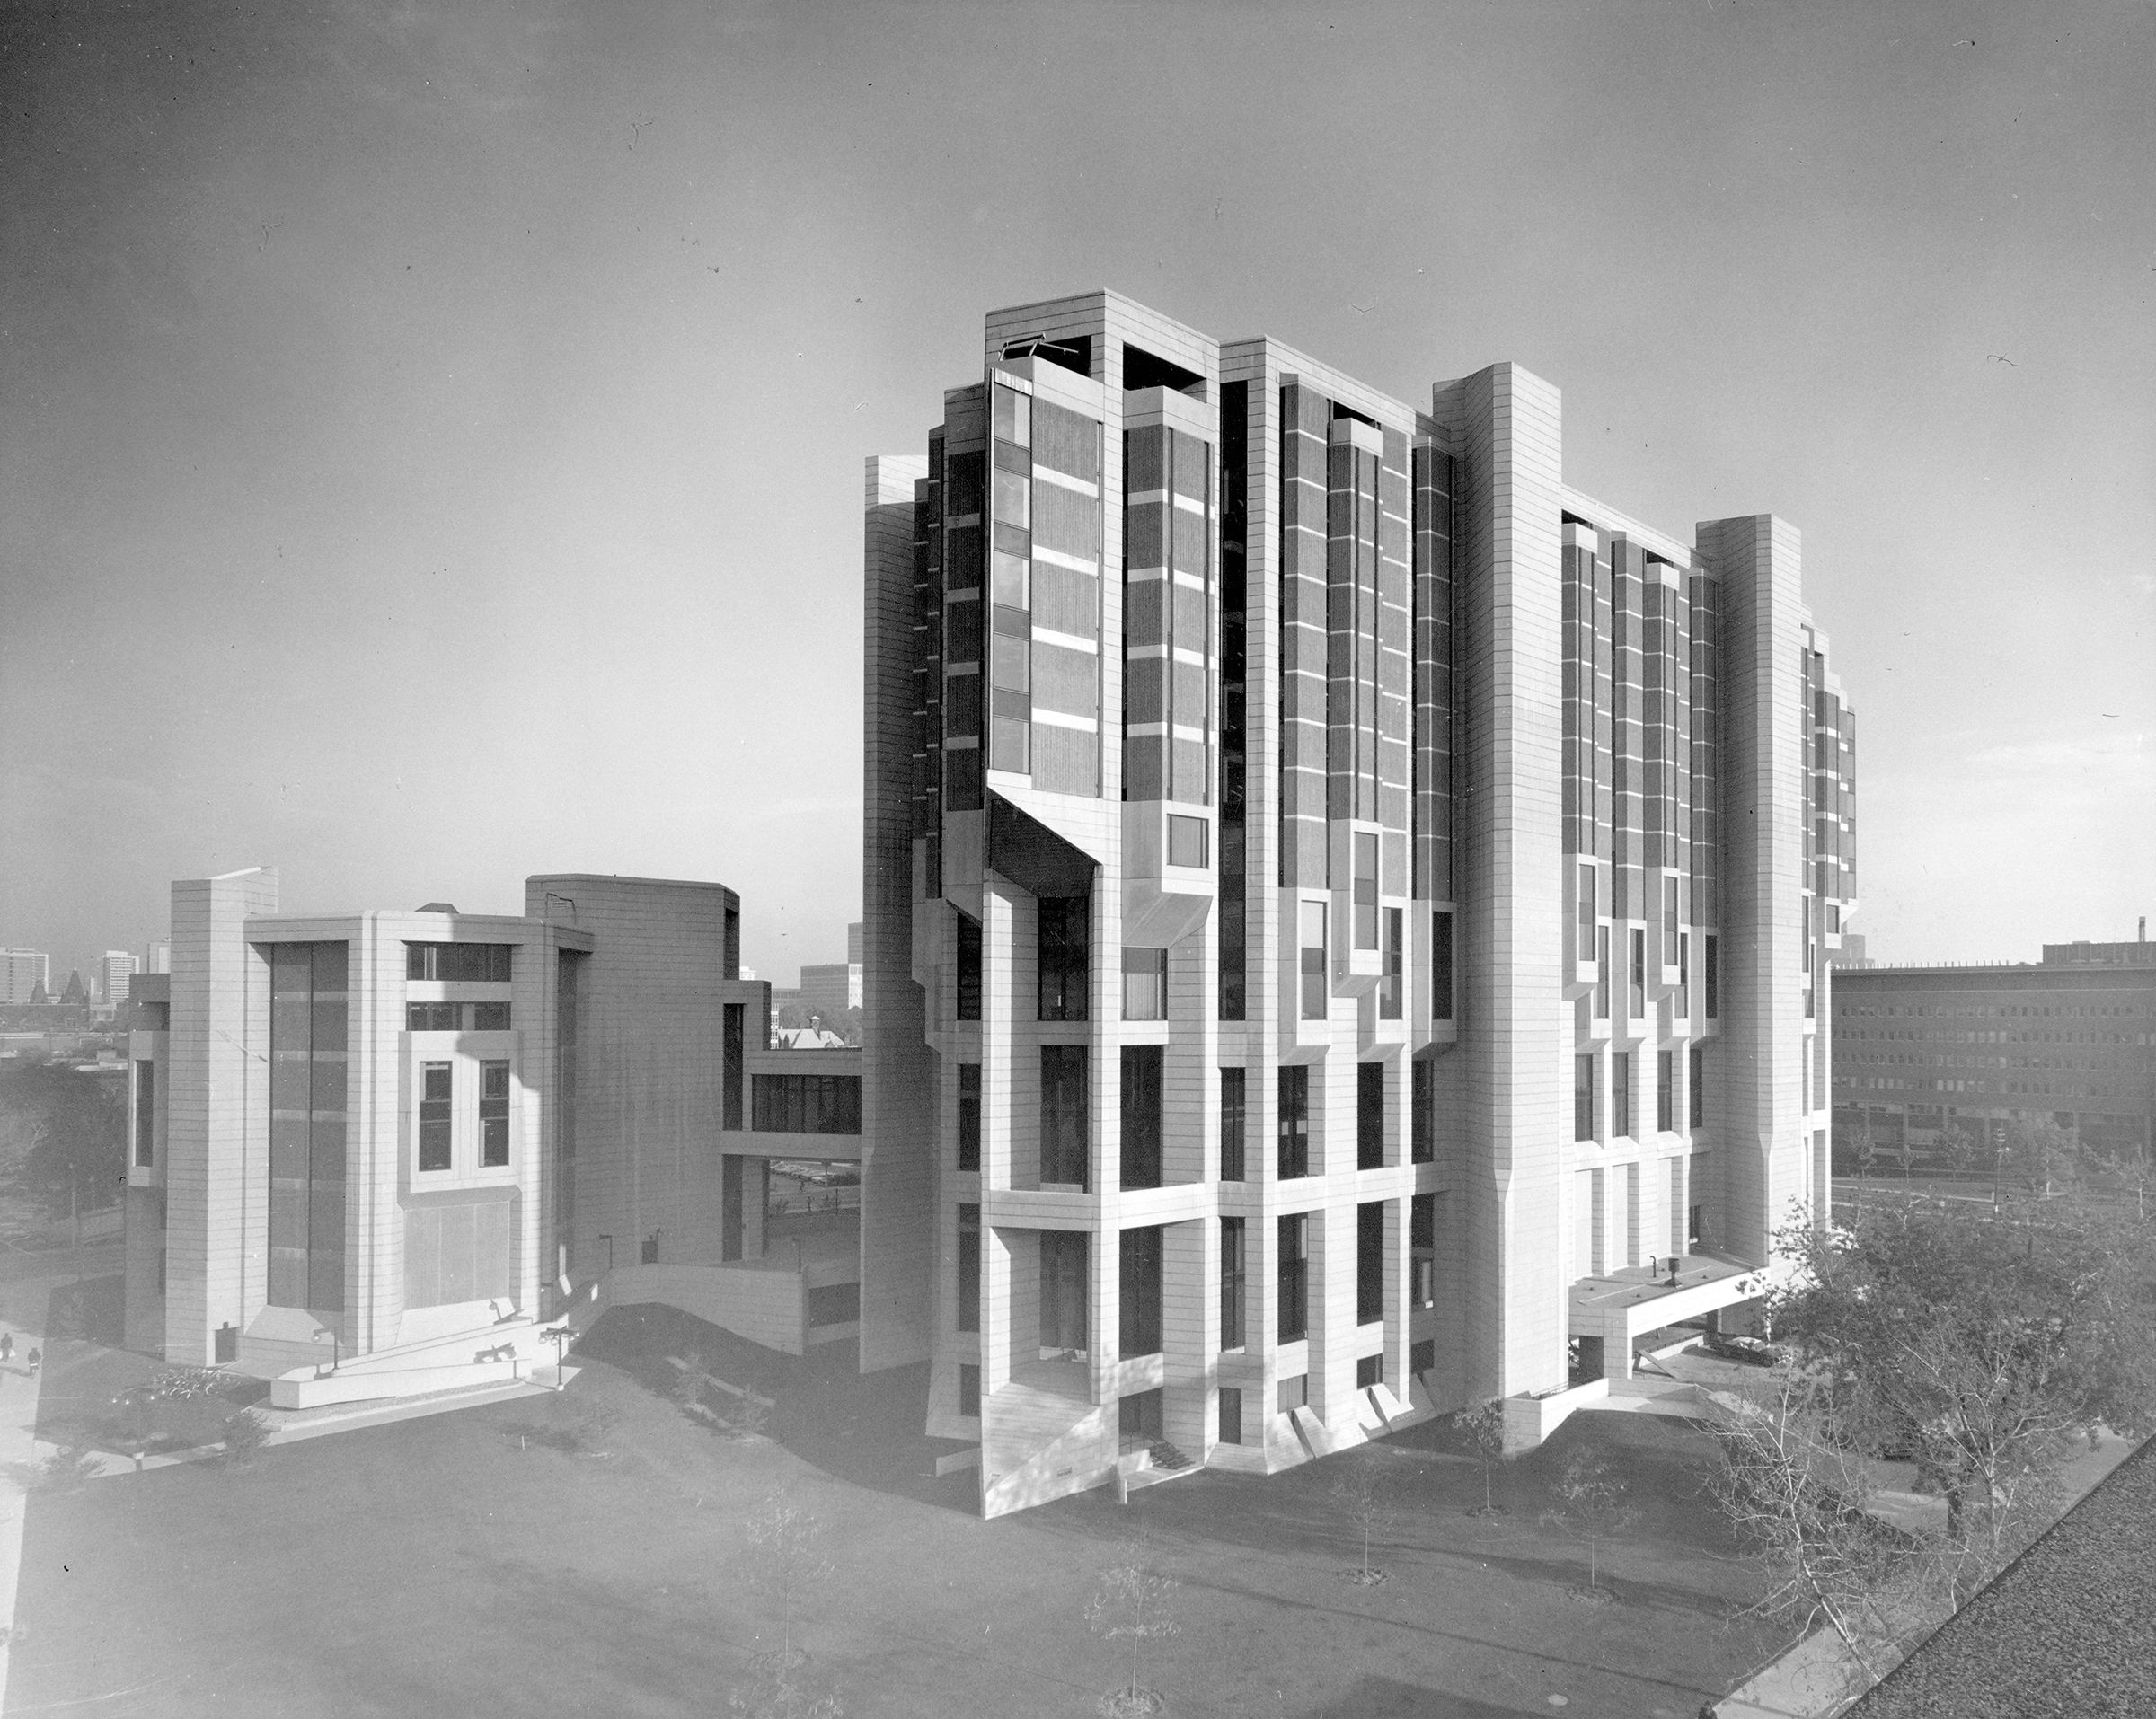 View of the Robarts Library complex from the intersection of Sussex Avenue and Huron Street, Spring 1973. View of the Robarts Library complex from the intersection of Sussex Avenue and Huron Street, Spring 1973. [U of T Archives]